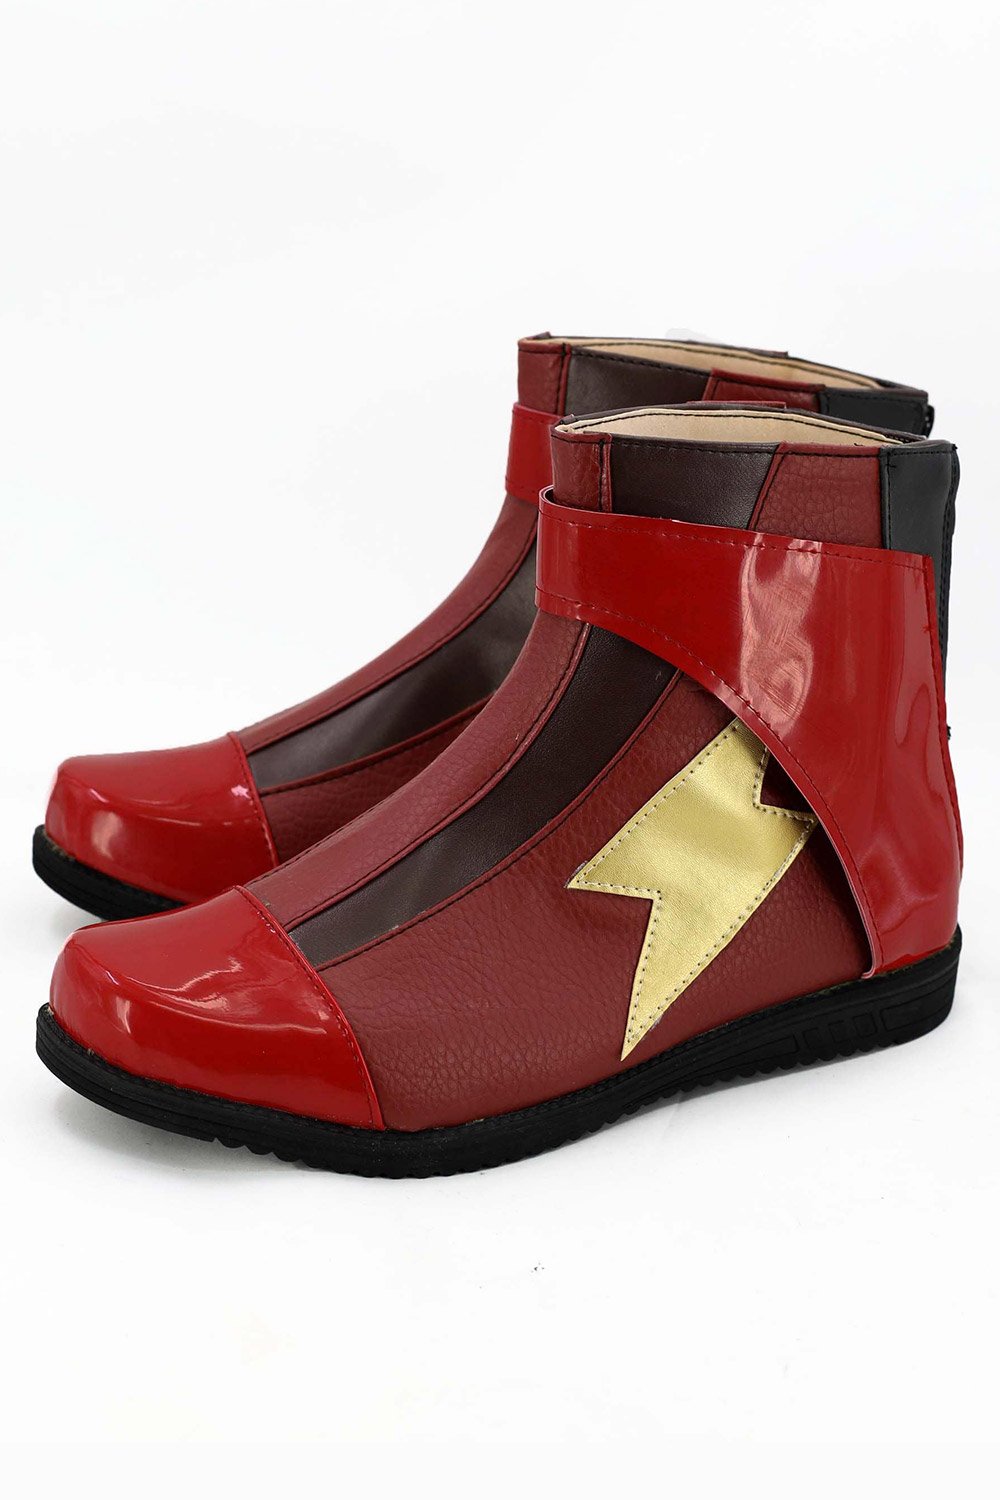 Justice League 2017 Movie Barry Allen Flash Boots Cosplay Shoes